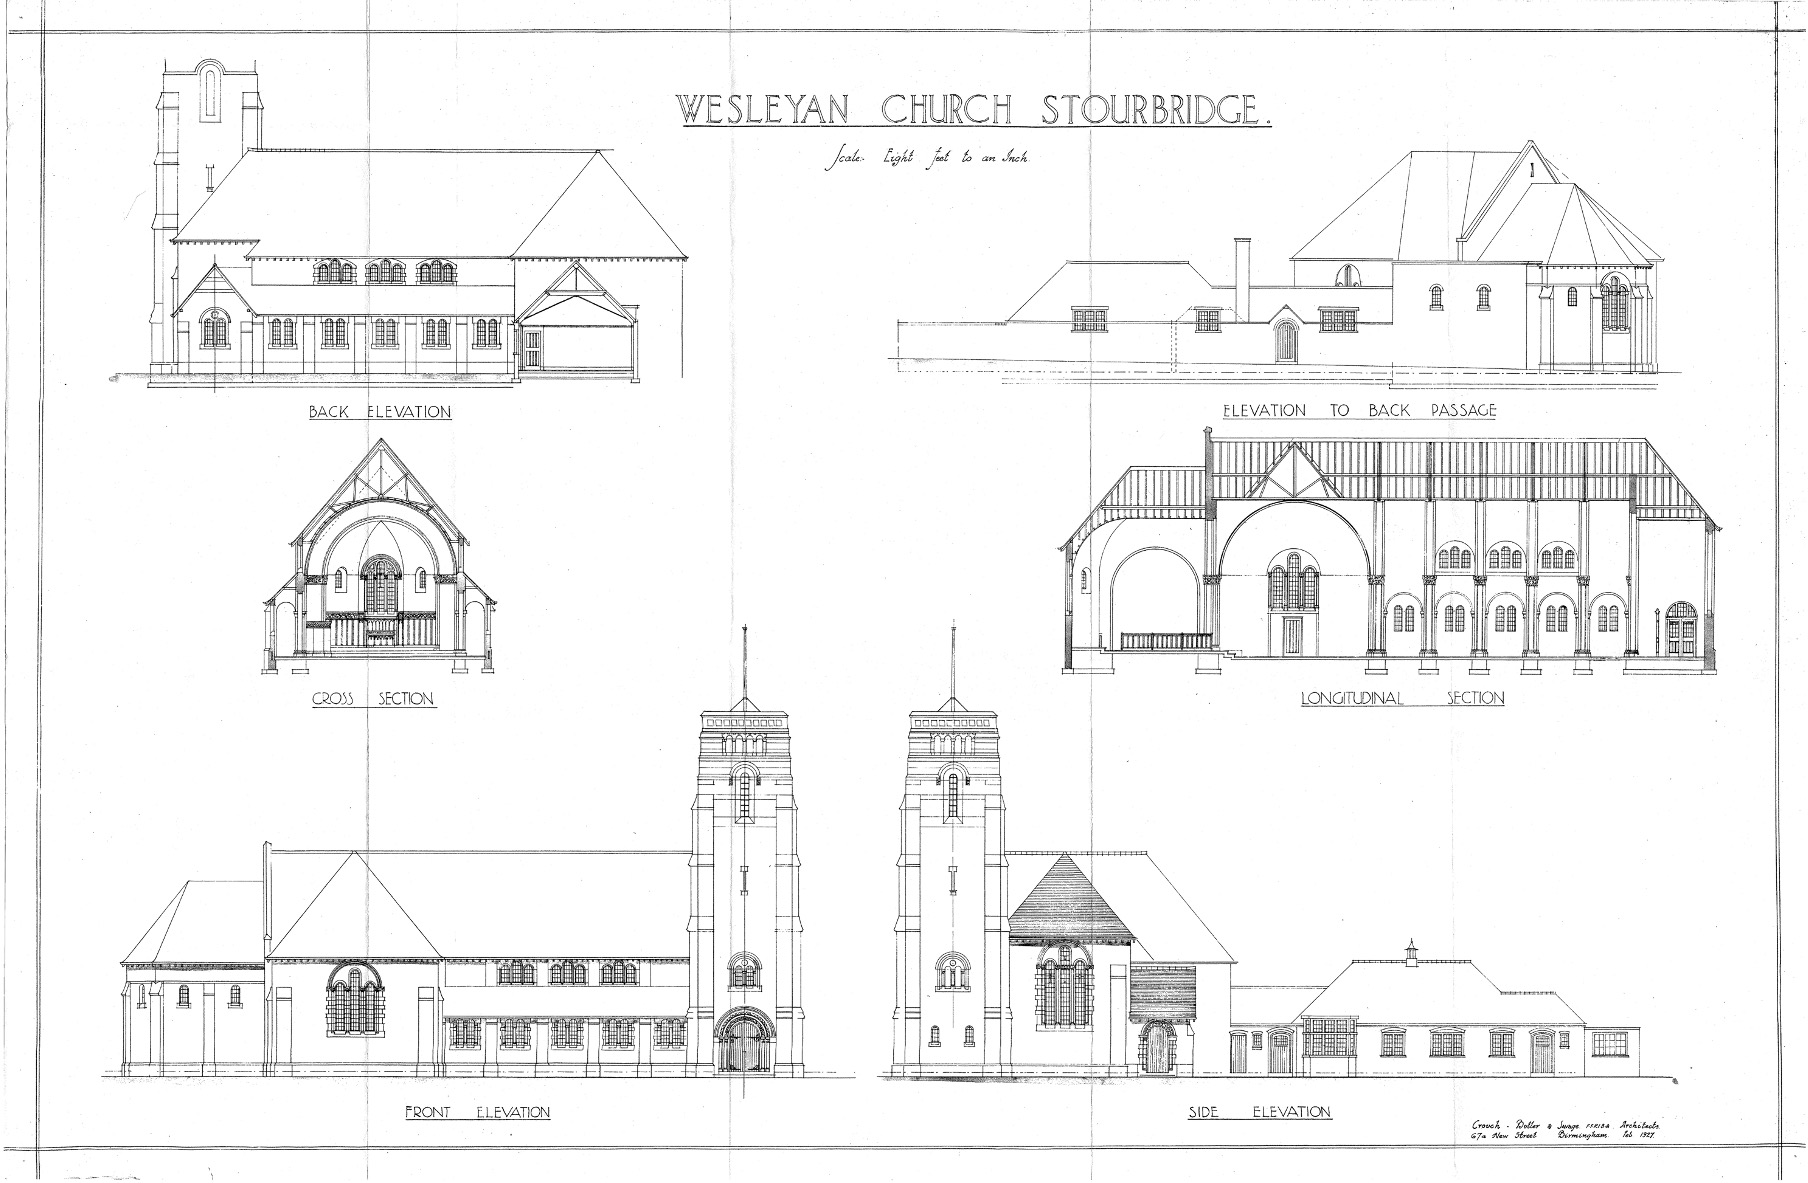 Architects drawings of the "Welseyan Church Stourbridge" (New Road's current building). The back elevation, cross section, front elevation, elevation to the back passage, longitudal section and side elevation is shown.